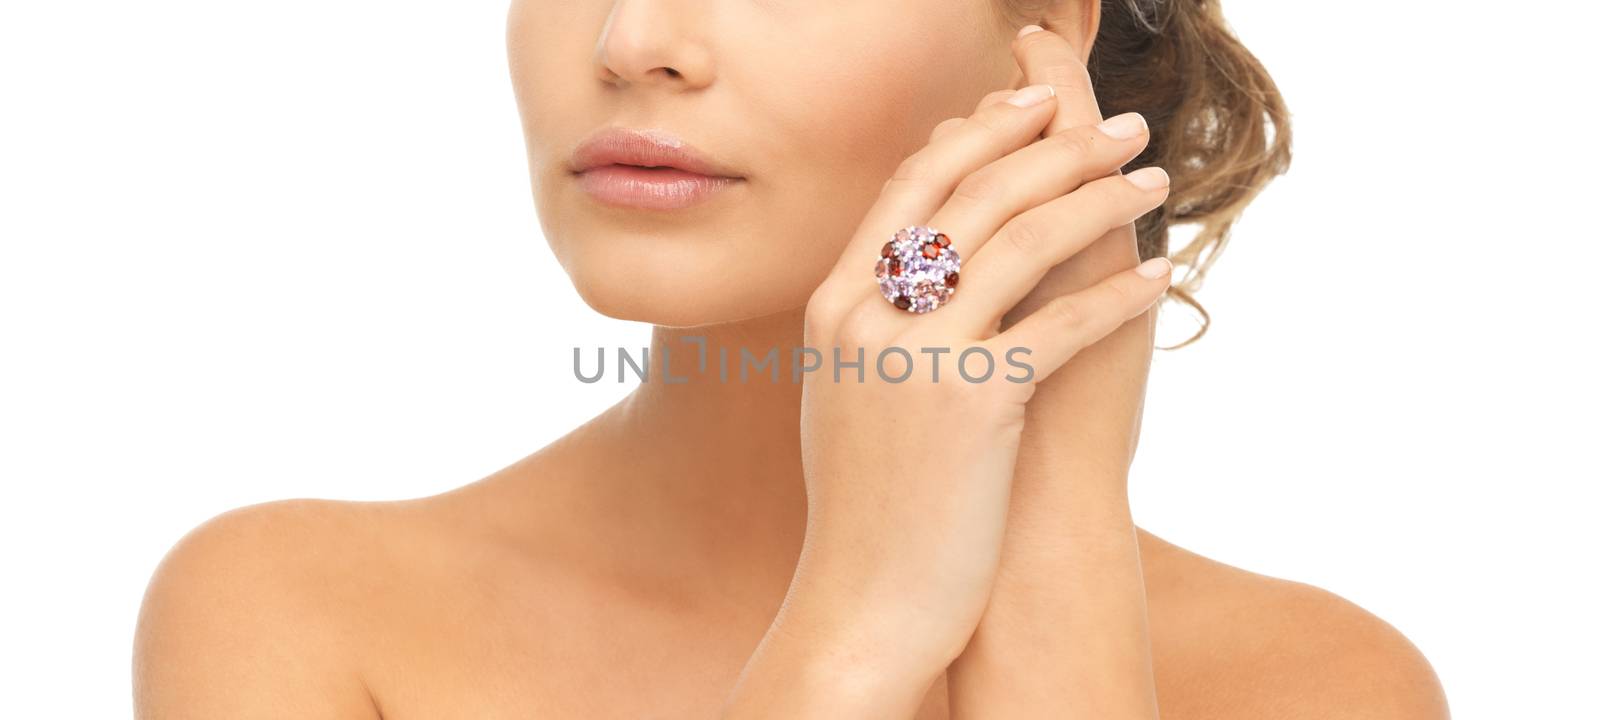 woman with one cocktail ring by dolgachov